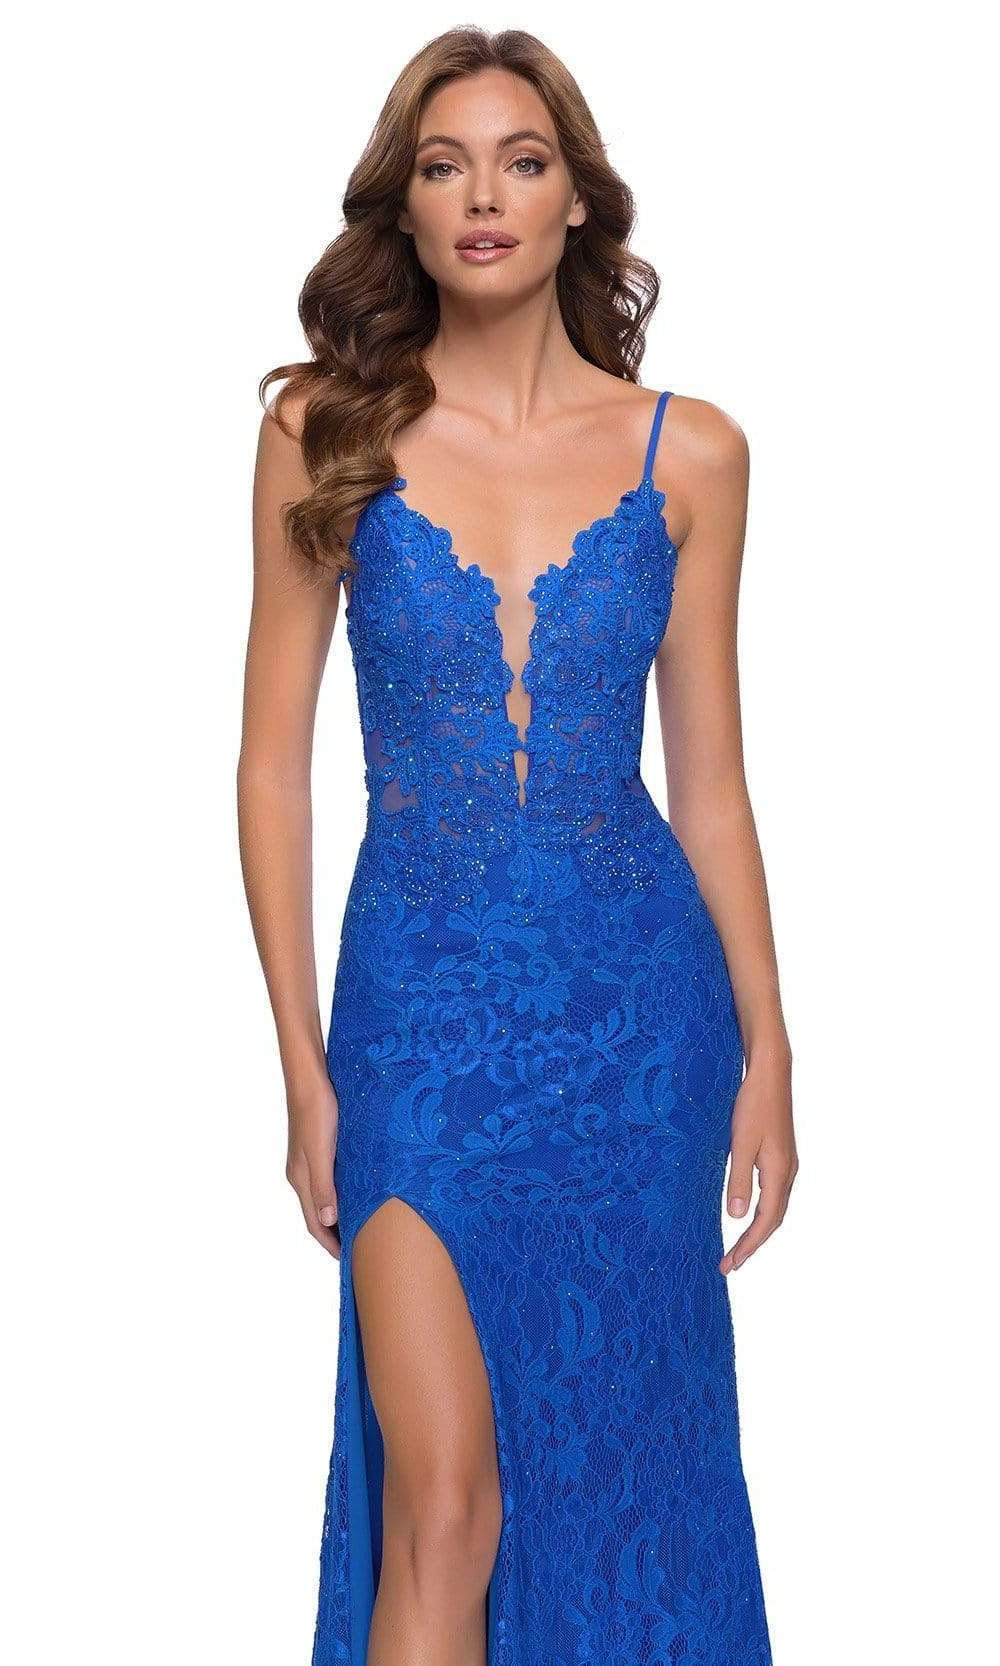 La Femme - 29842 Plunging Jeweled Lace High Slit Dress Special Occasion Dress